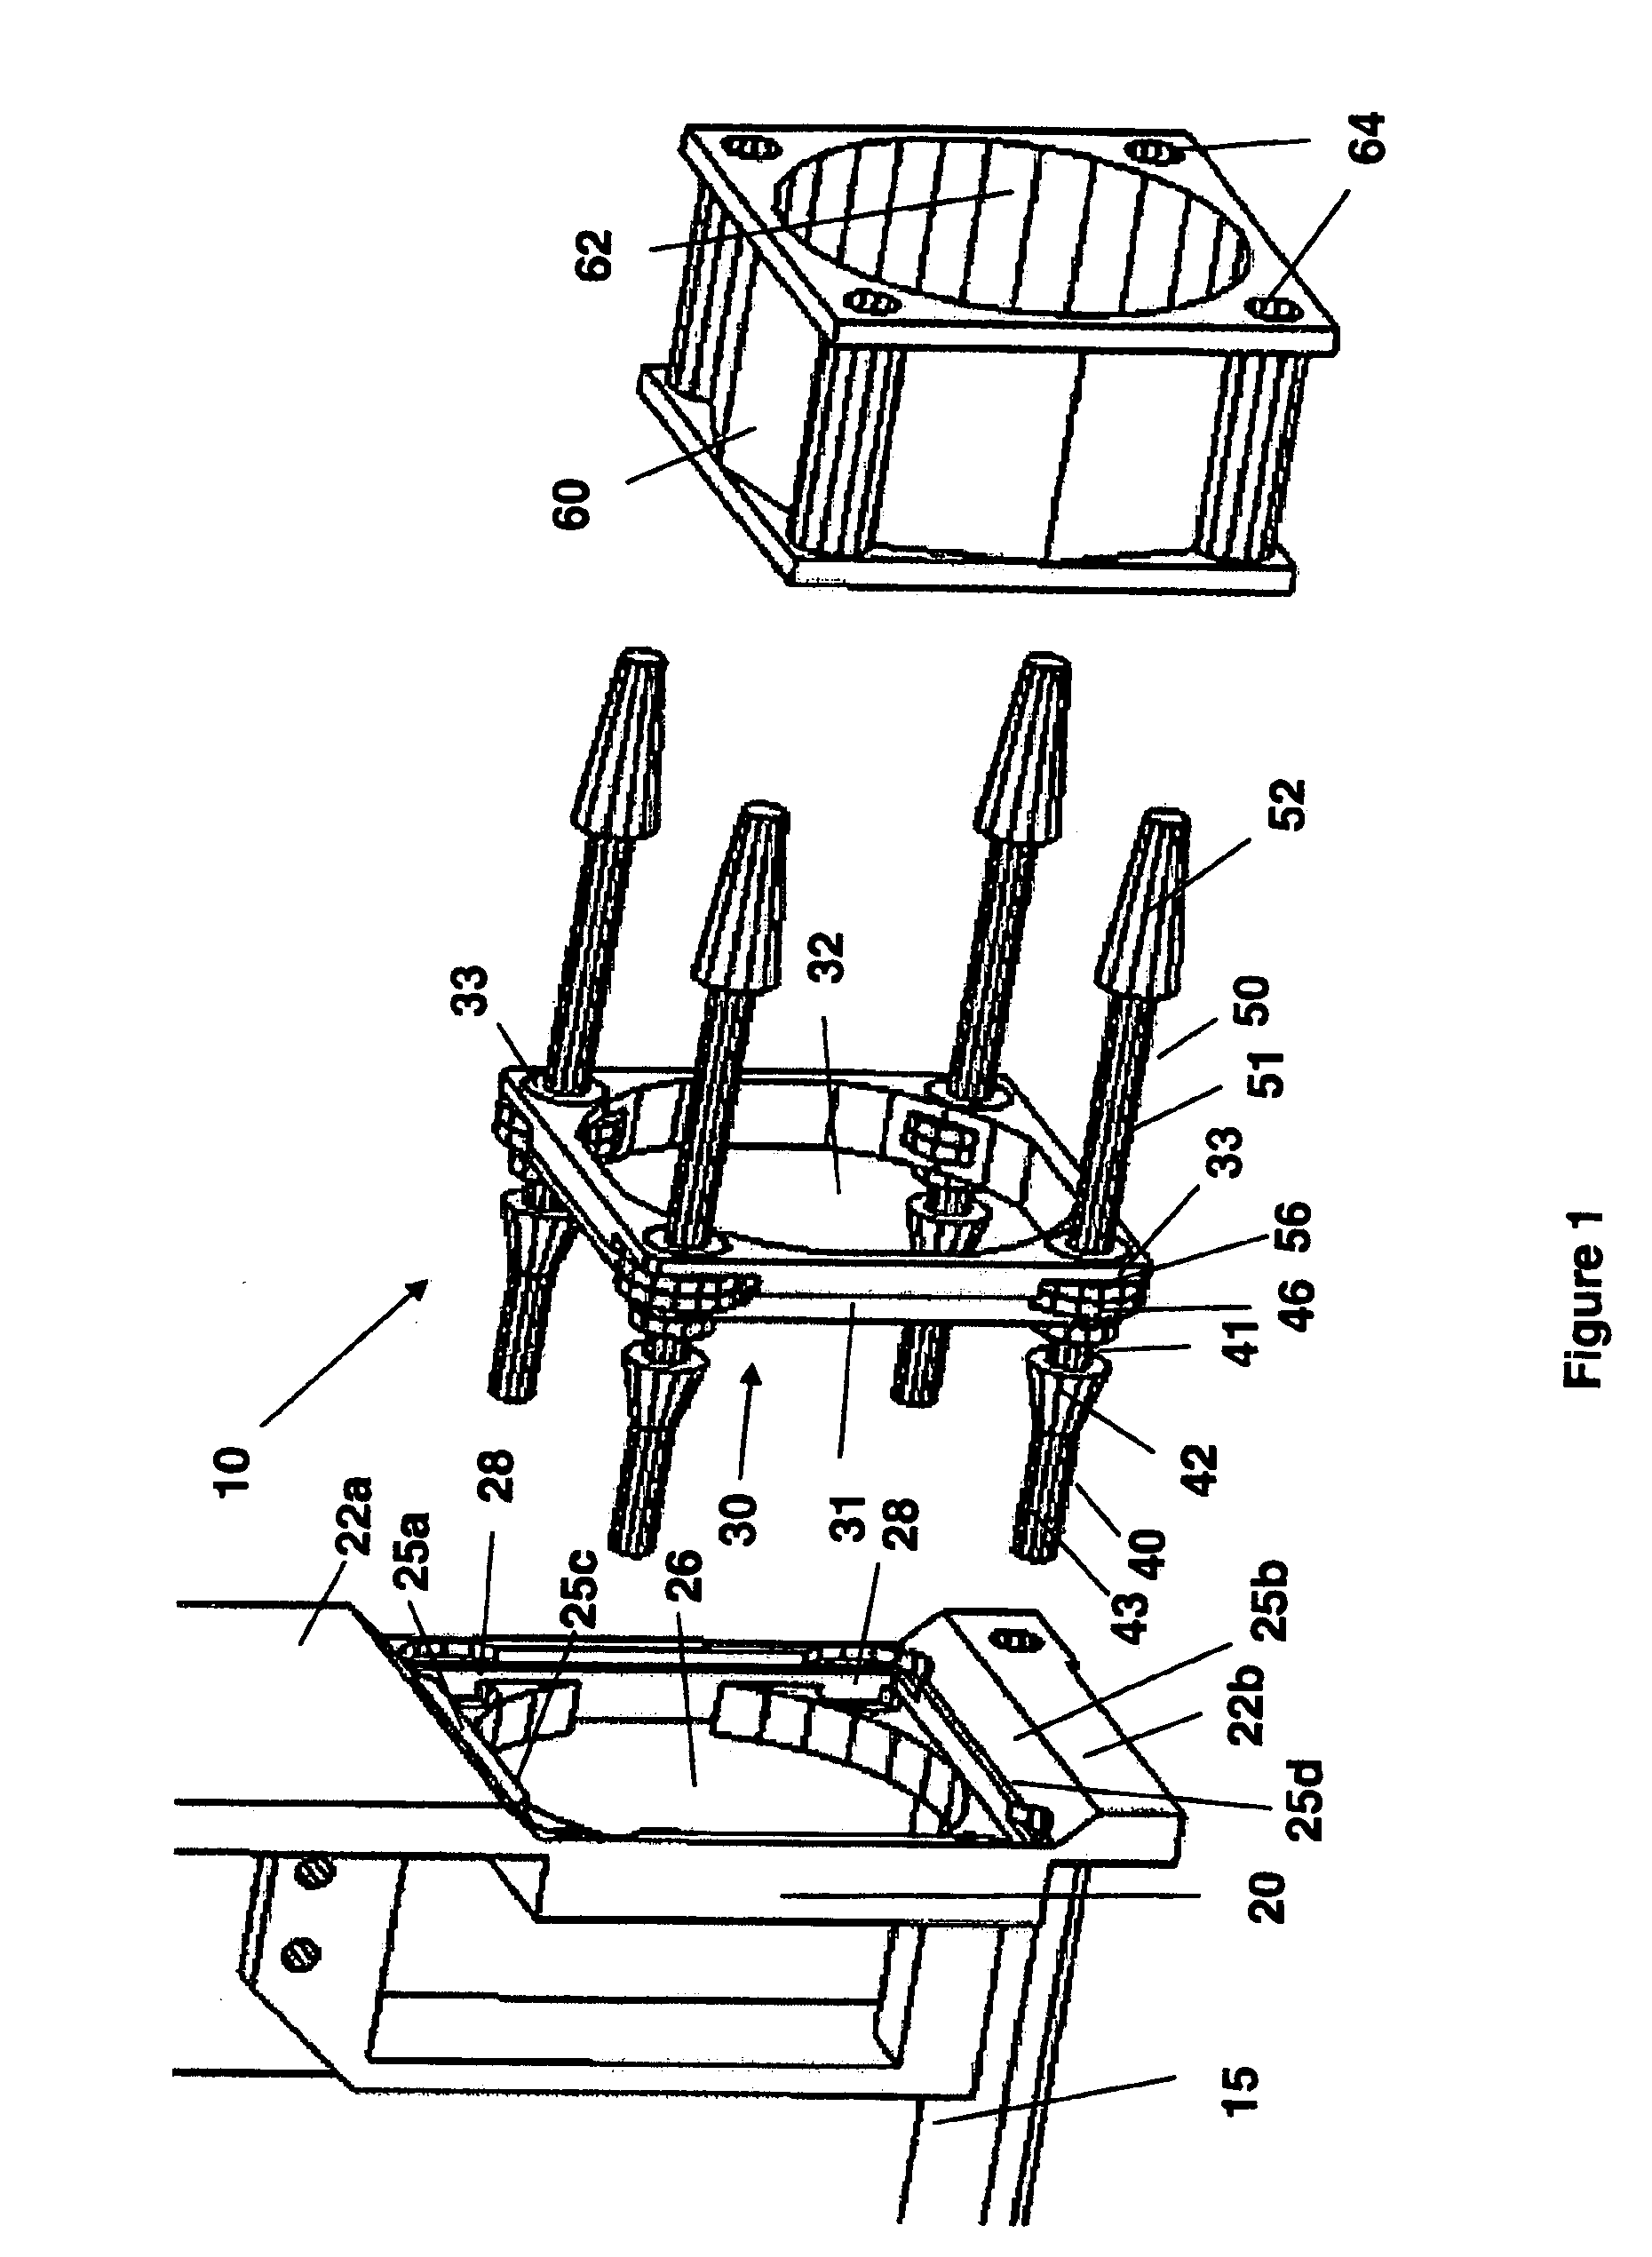 Structure-borne noise isolation technique and apparatus for fans and blowers